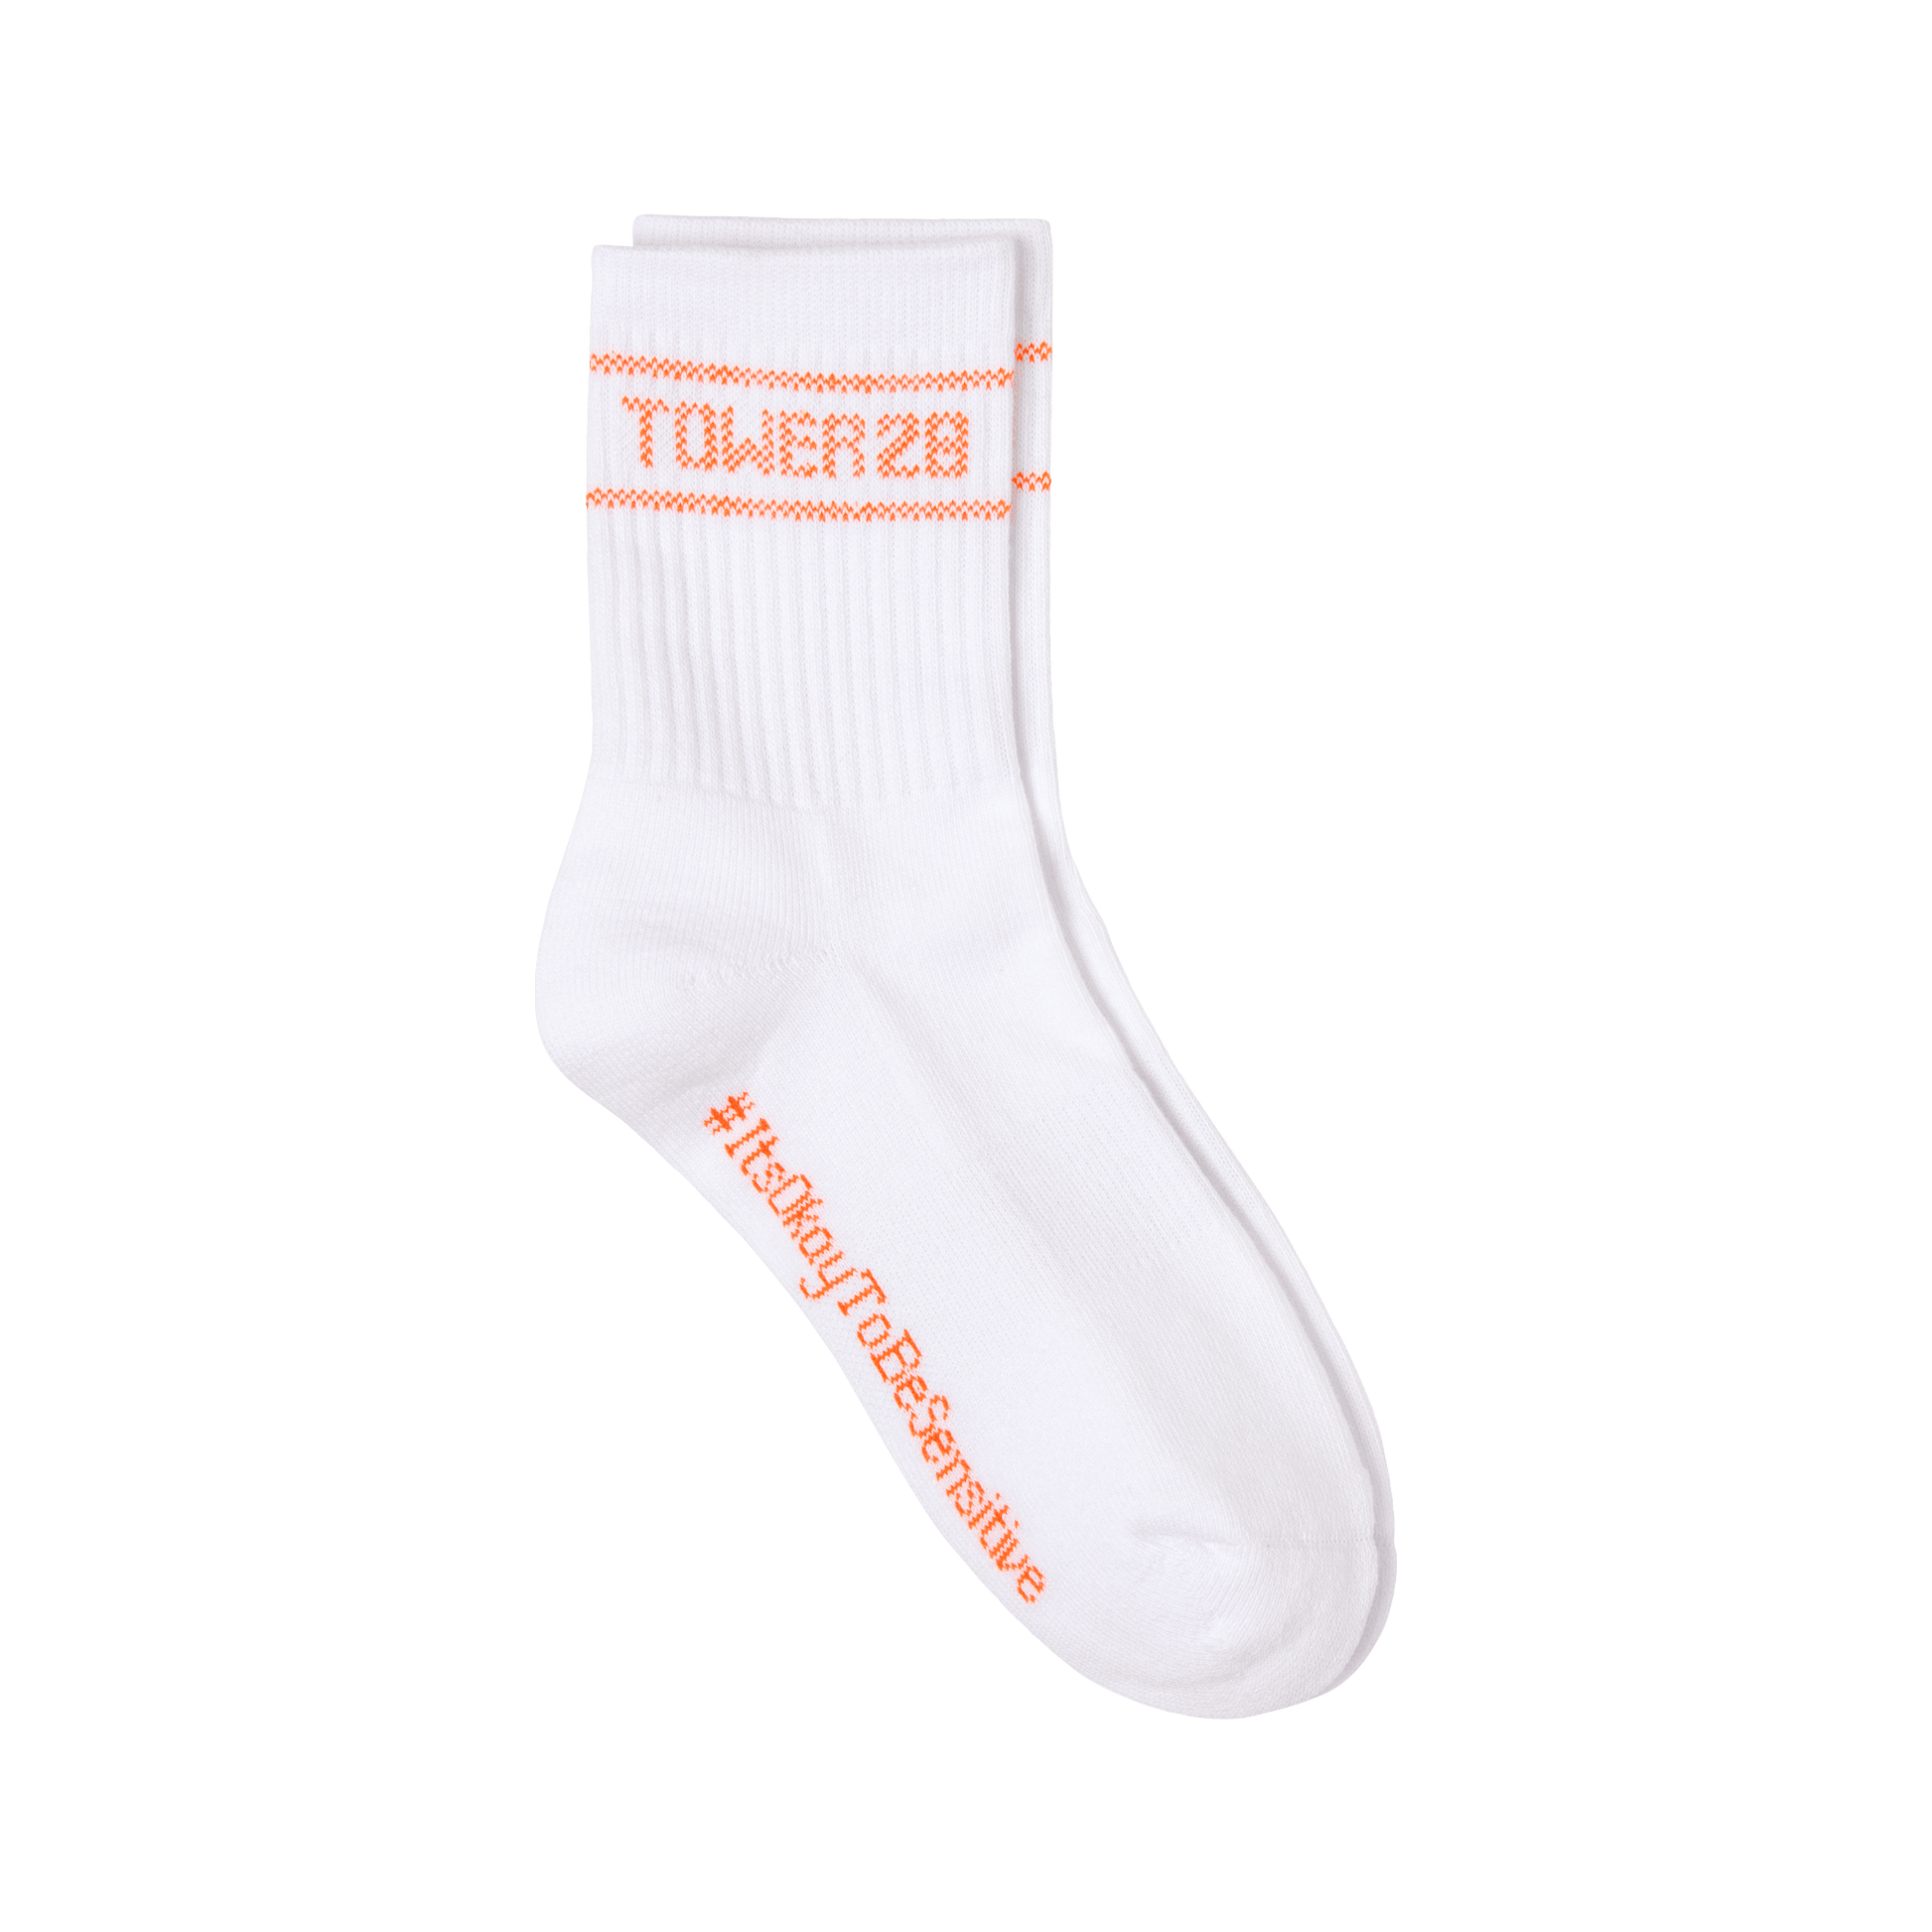 [Shared: A pair of Tower 28 Beauty's white crew socks designed with orange cross stiching that says "Tower 28" and "#ItsOkayToBeSensitive"